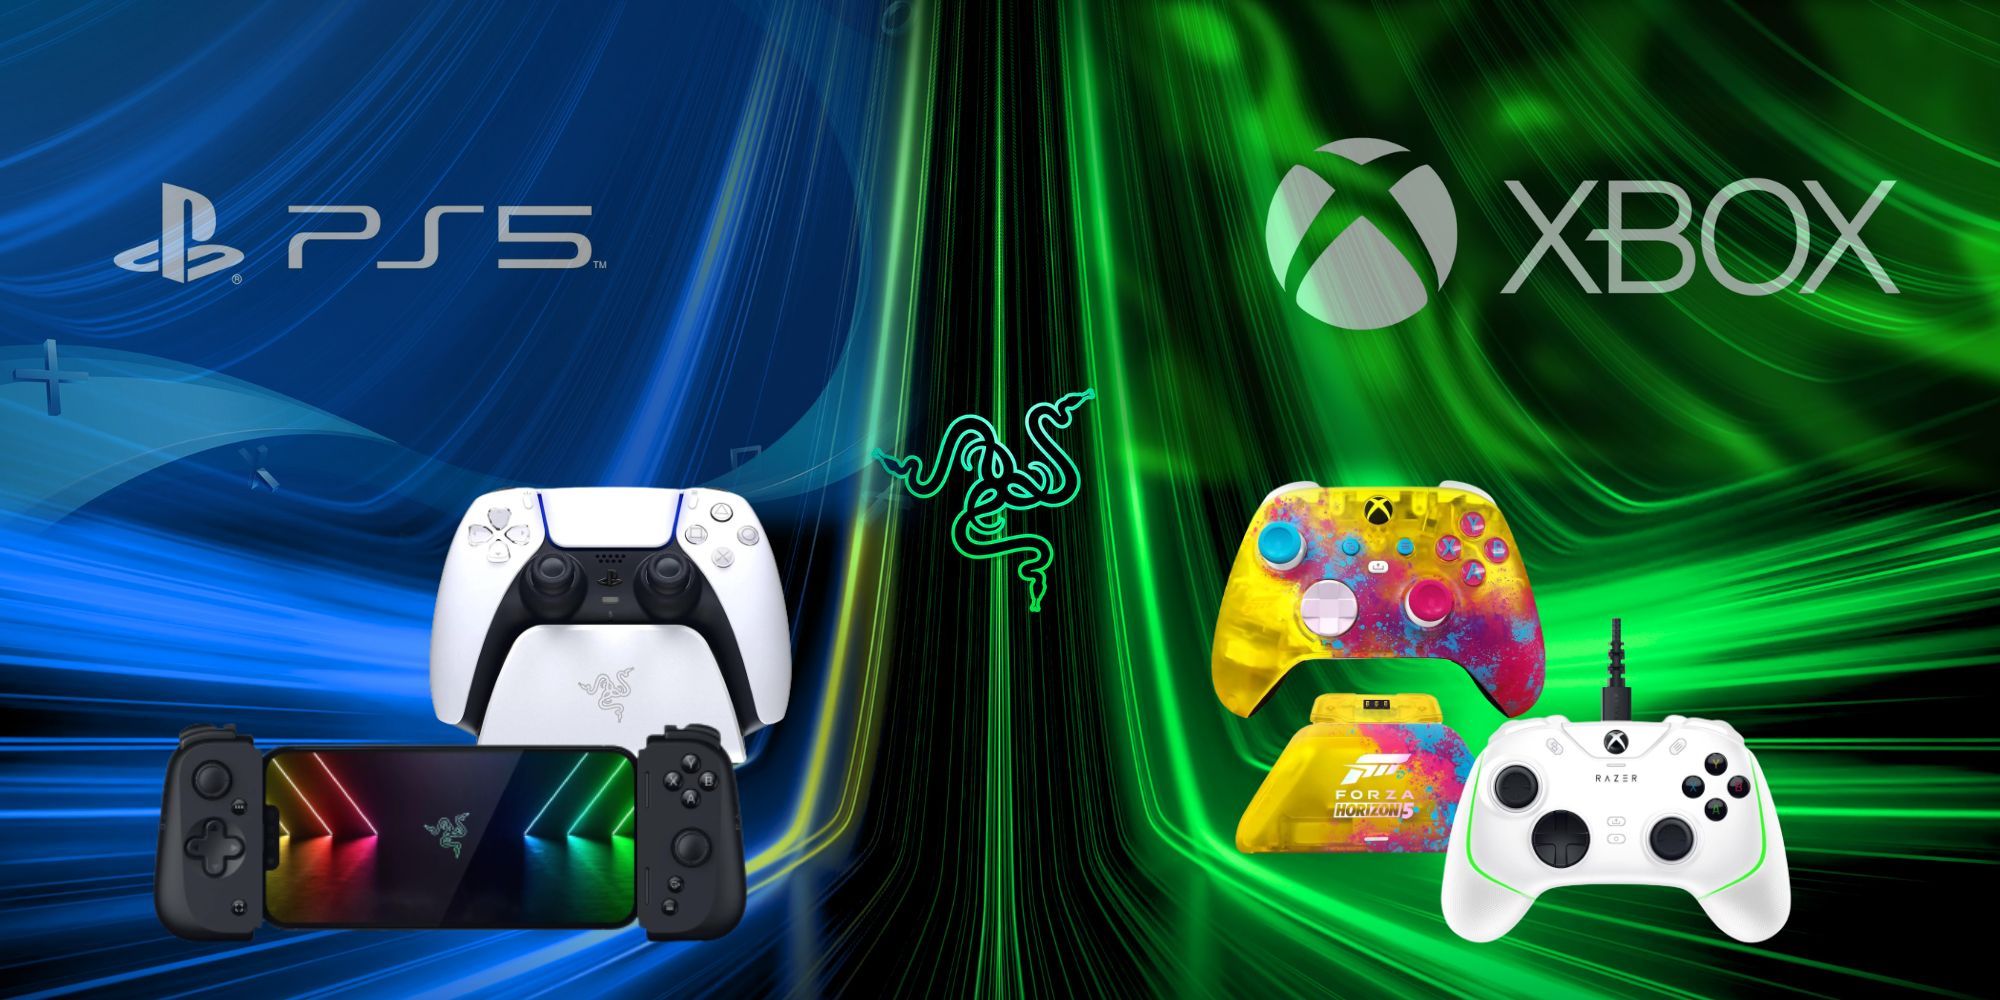 Razer wallpaper with the blue PS5 & green Xbox logos with various products on the background